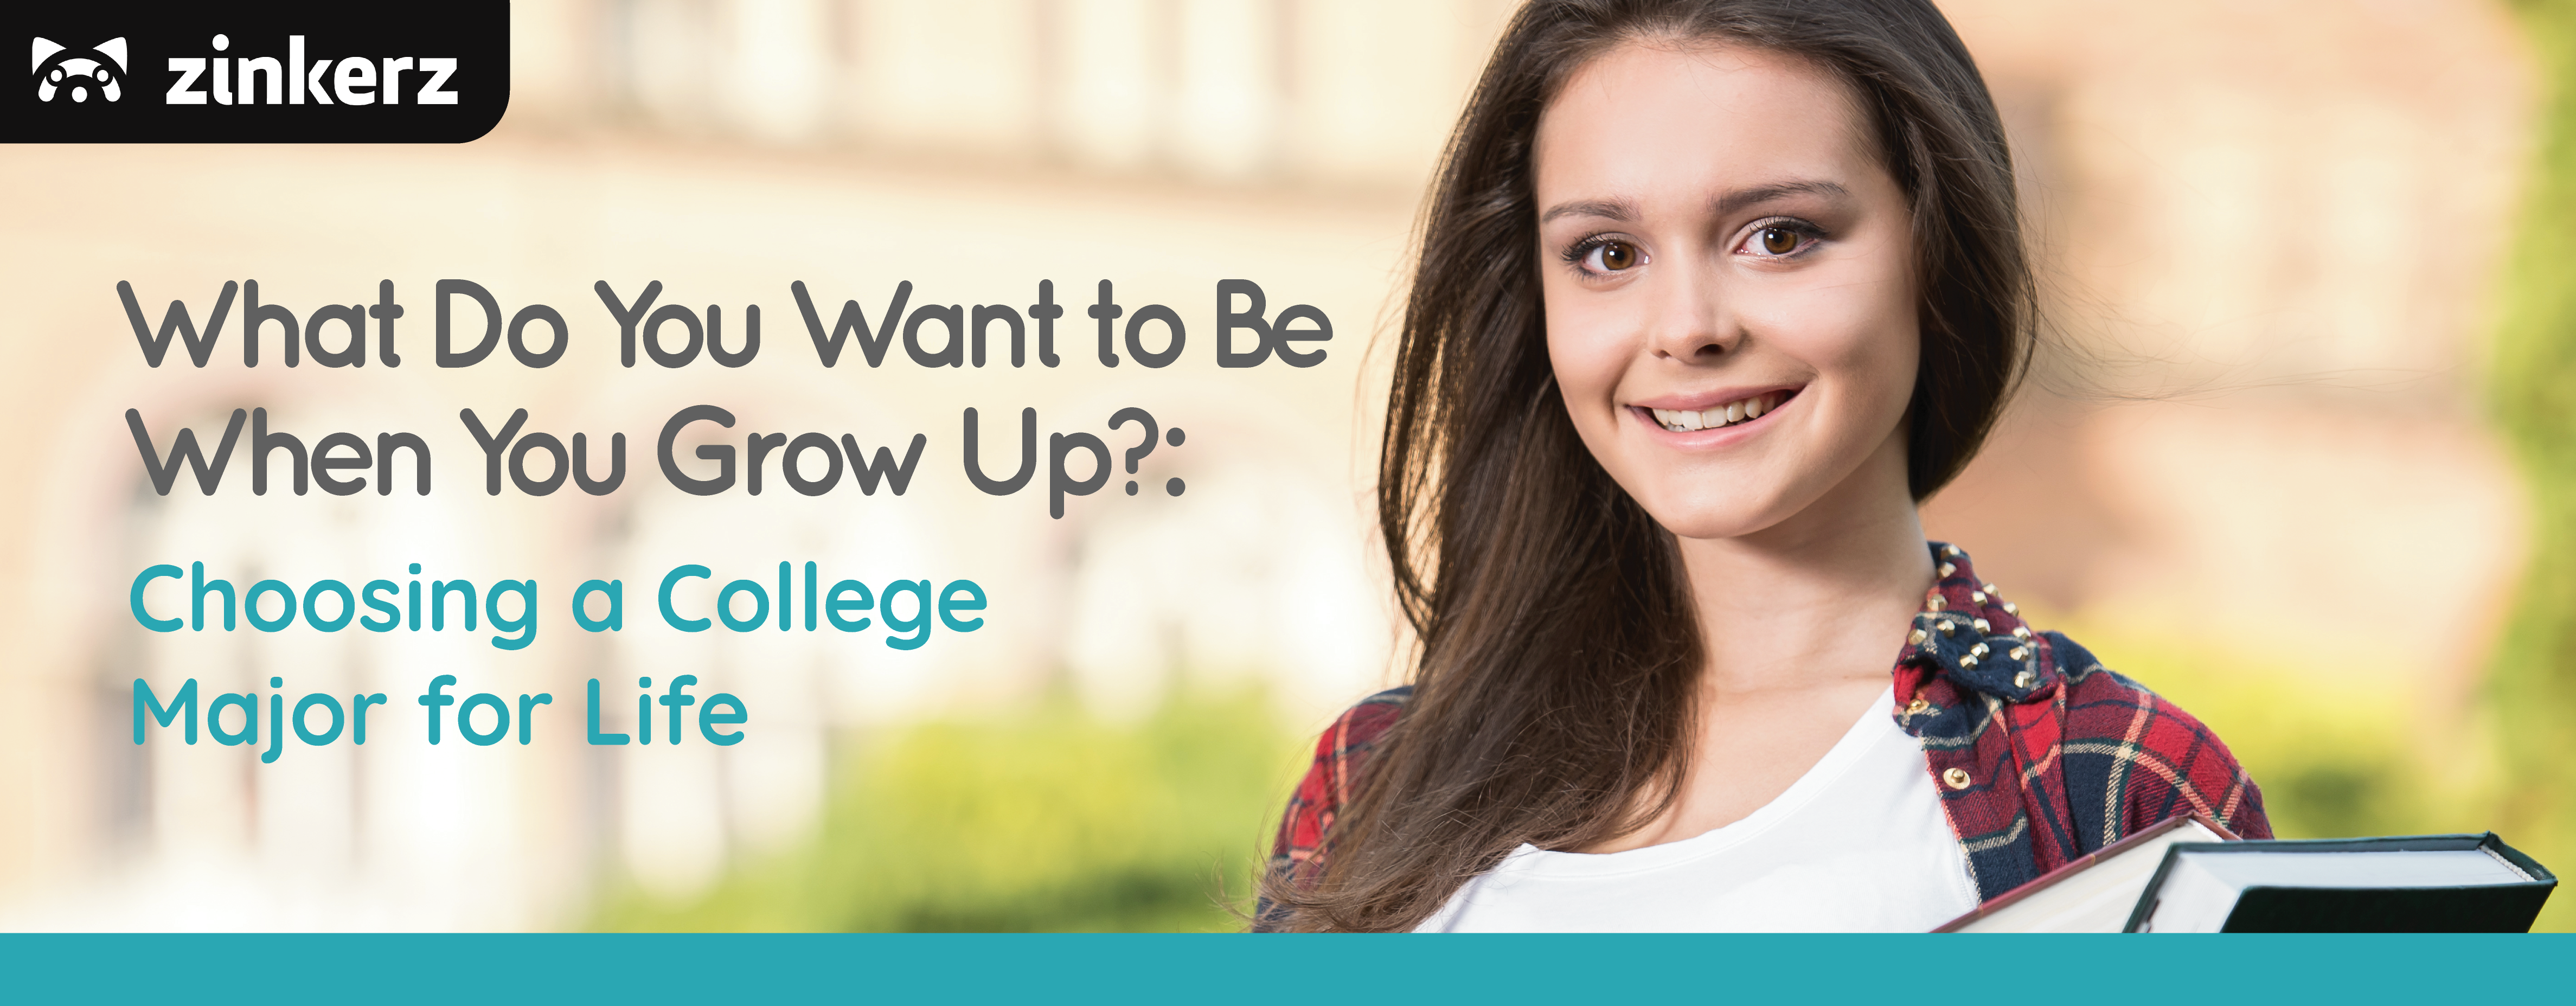 What Do You Want to Be When You Grow Up? Choosing a College Major for Life